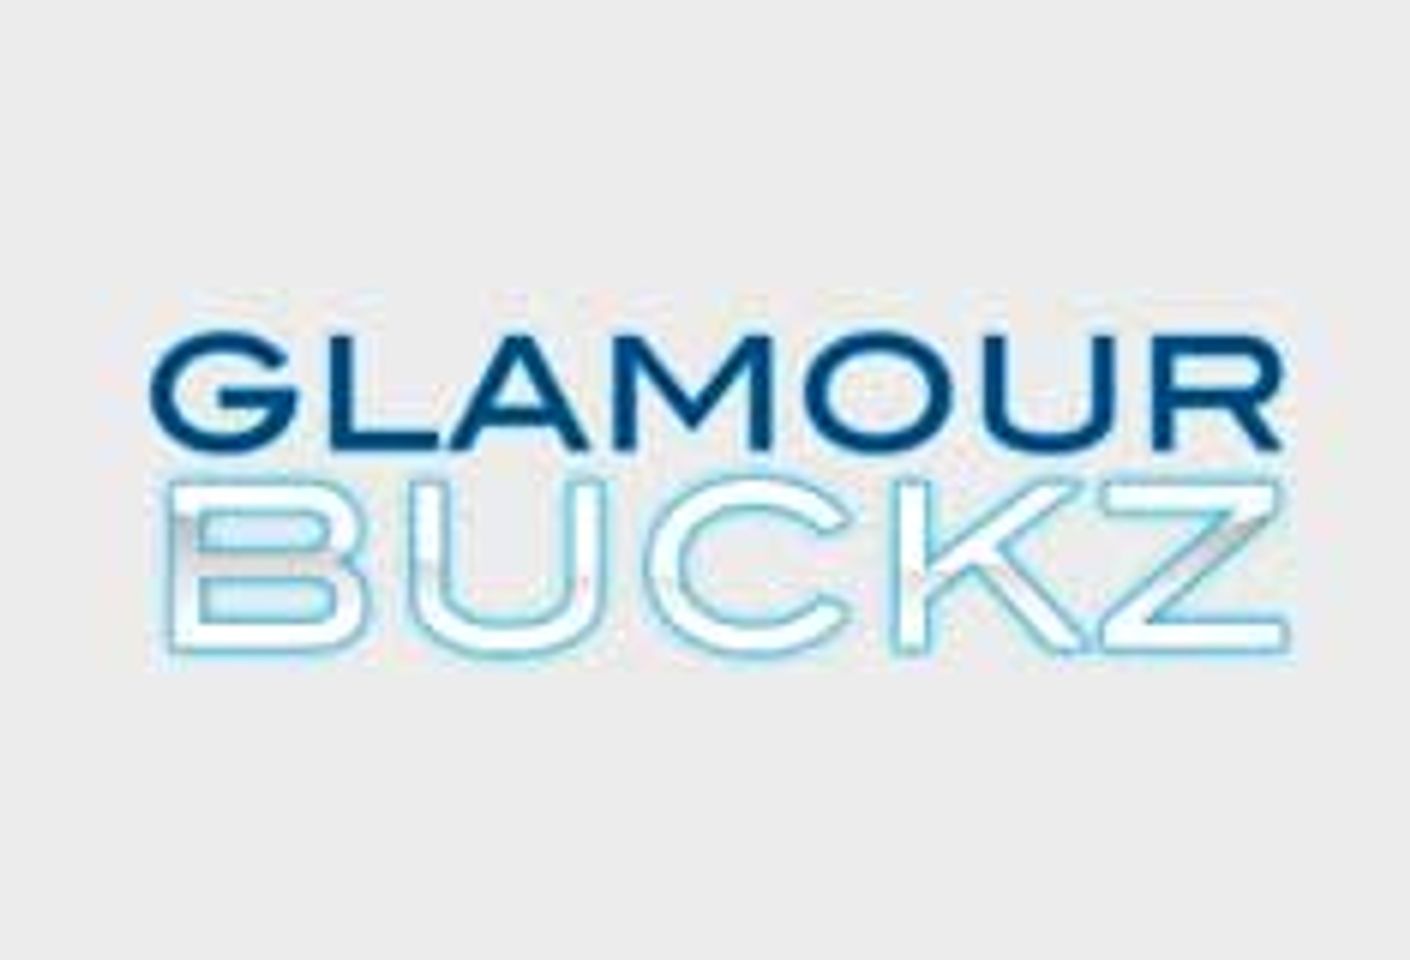 GlamourBuckz.com Launches with 12 Solo-Girl Sites